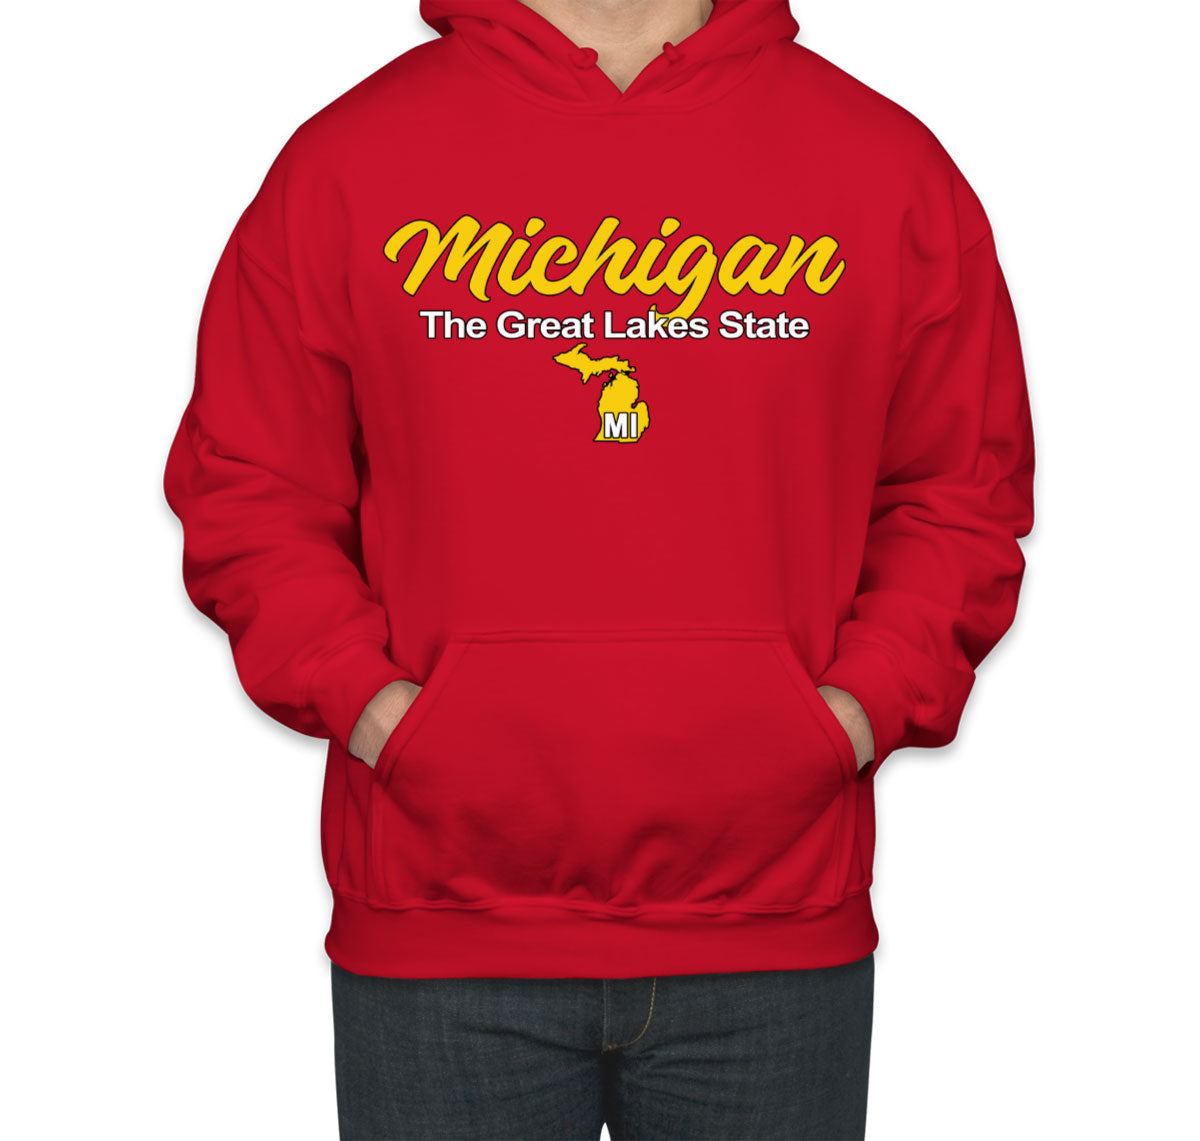 Michigan The Great Lakes State Unisex Hoodie